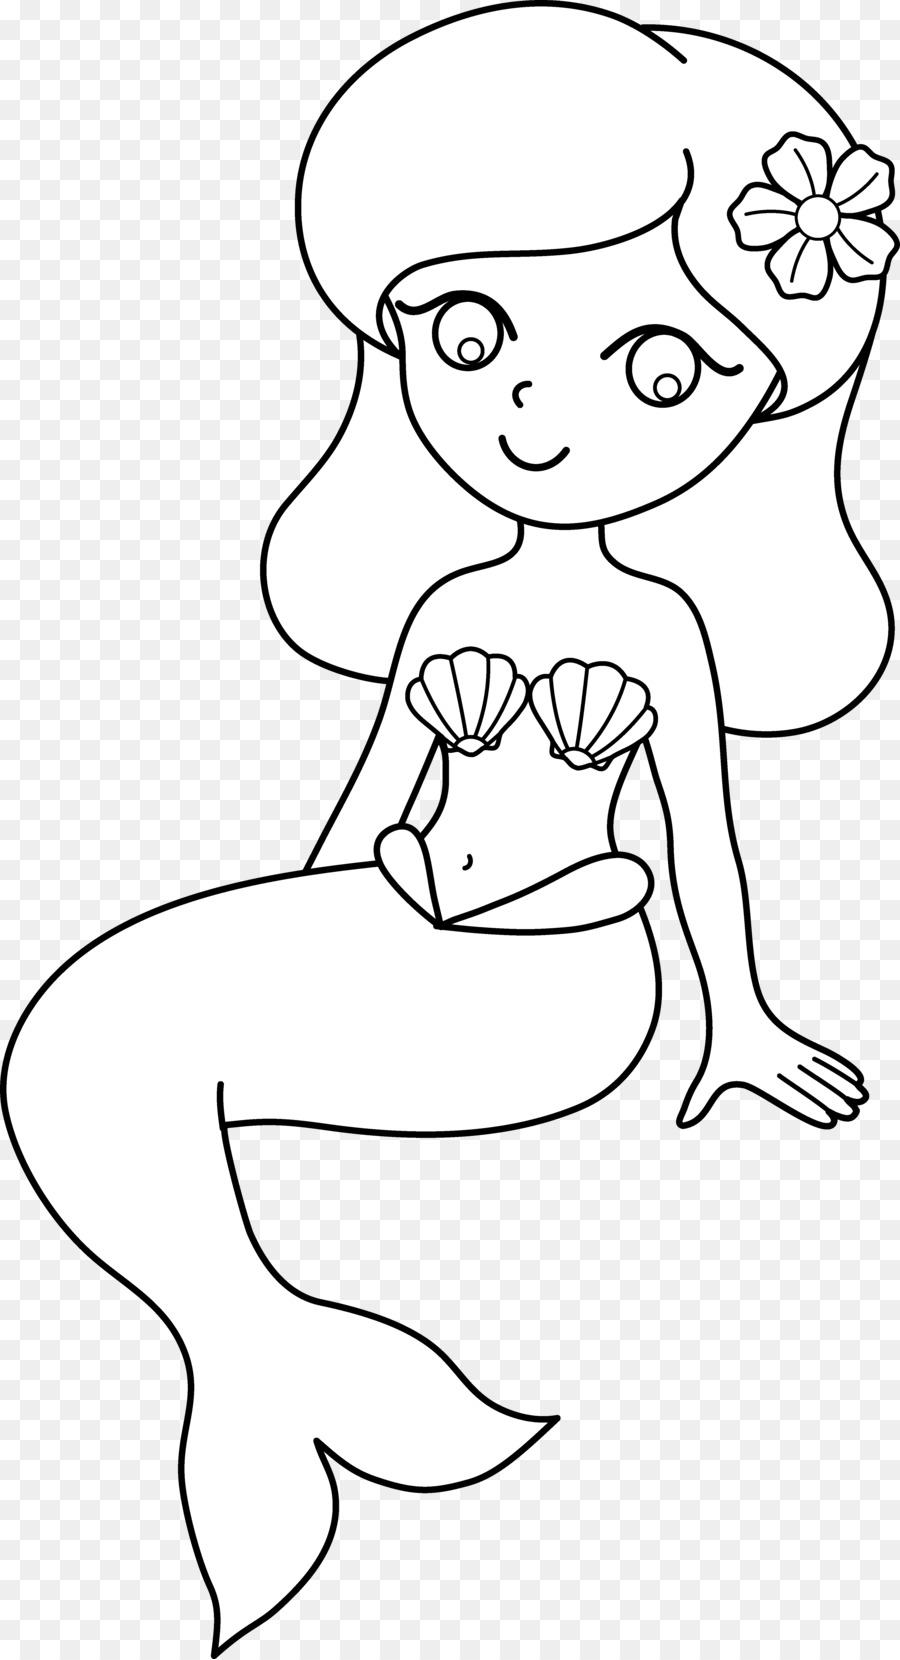 Mermaid Drawing Black and white Clip art - Mermaid Drawing Cliparts png download - 4035*7437 - Free Transparent  png Download.